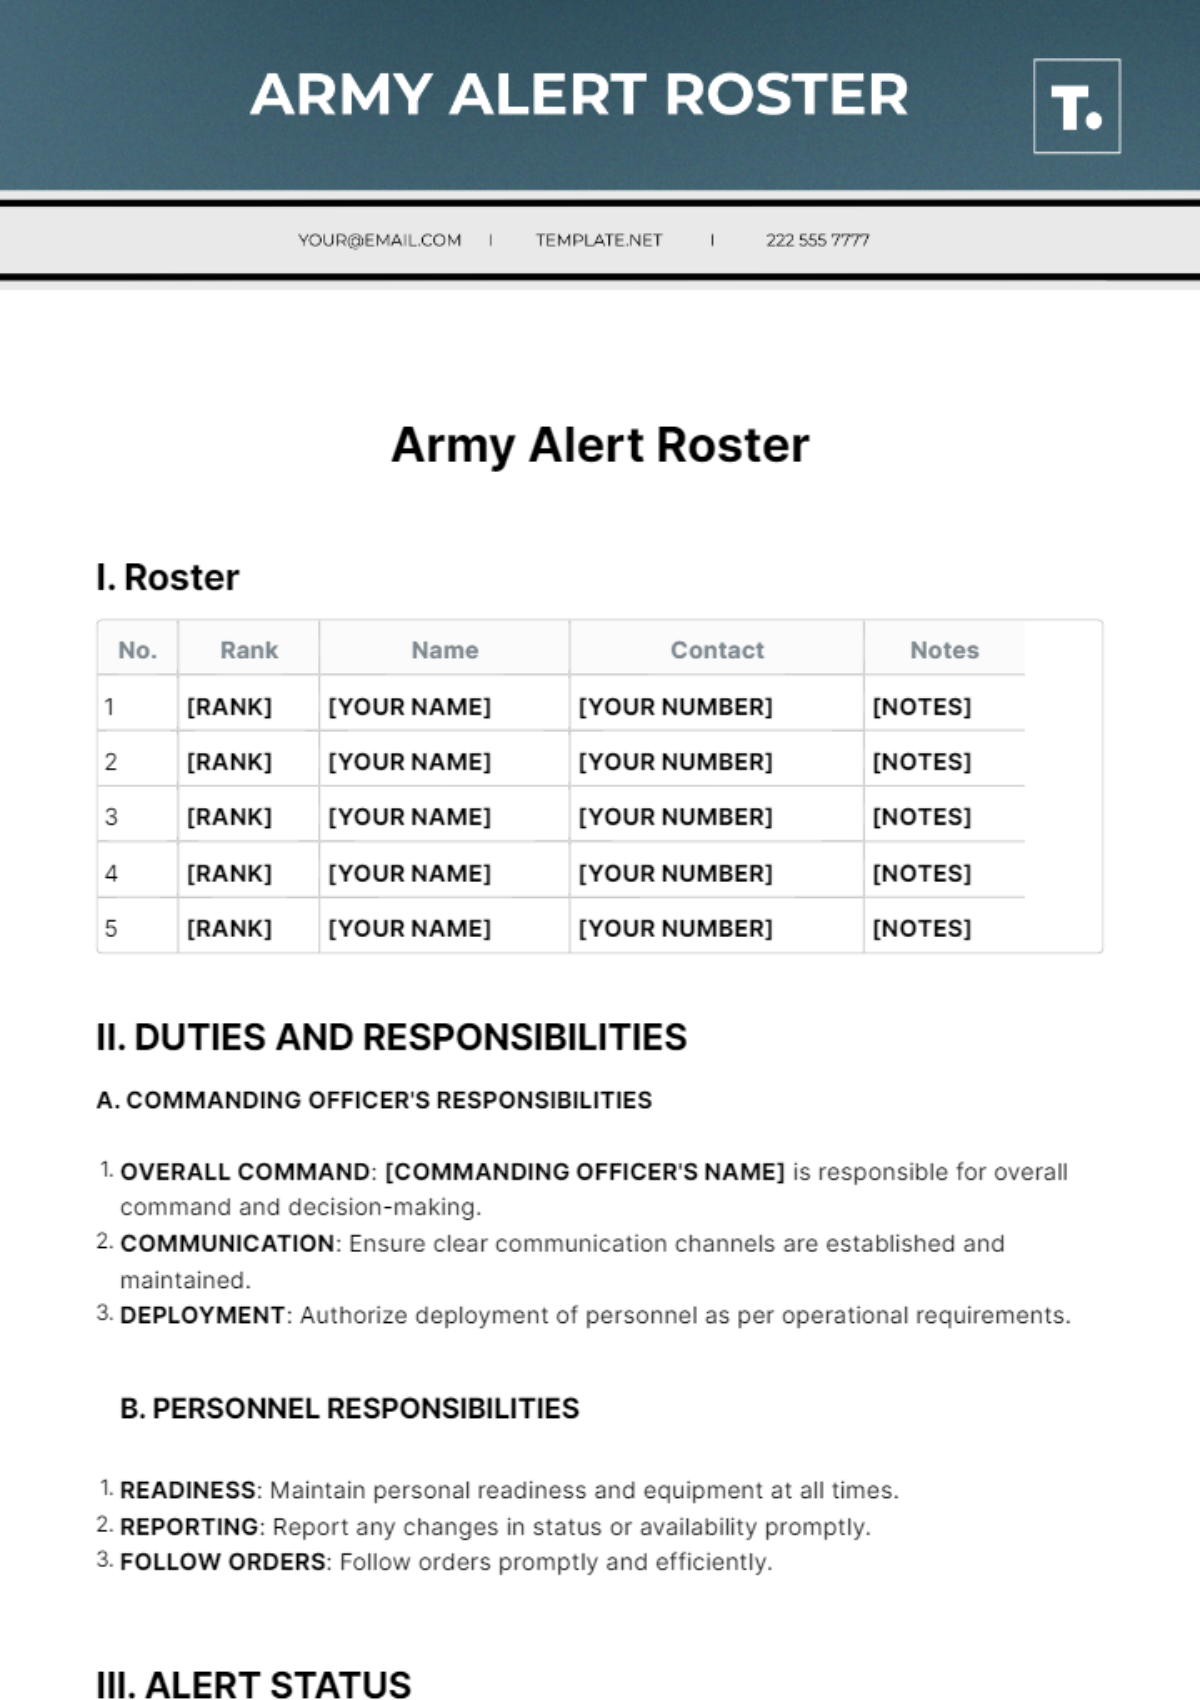 Army Alert Roster Template